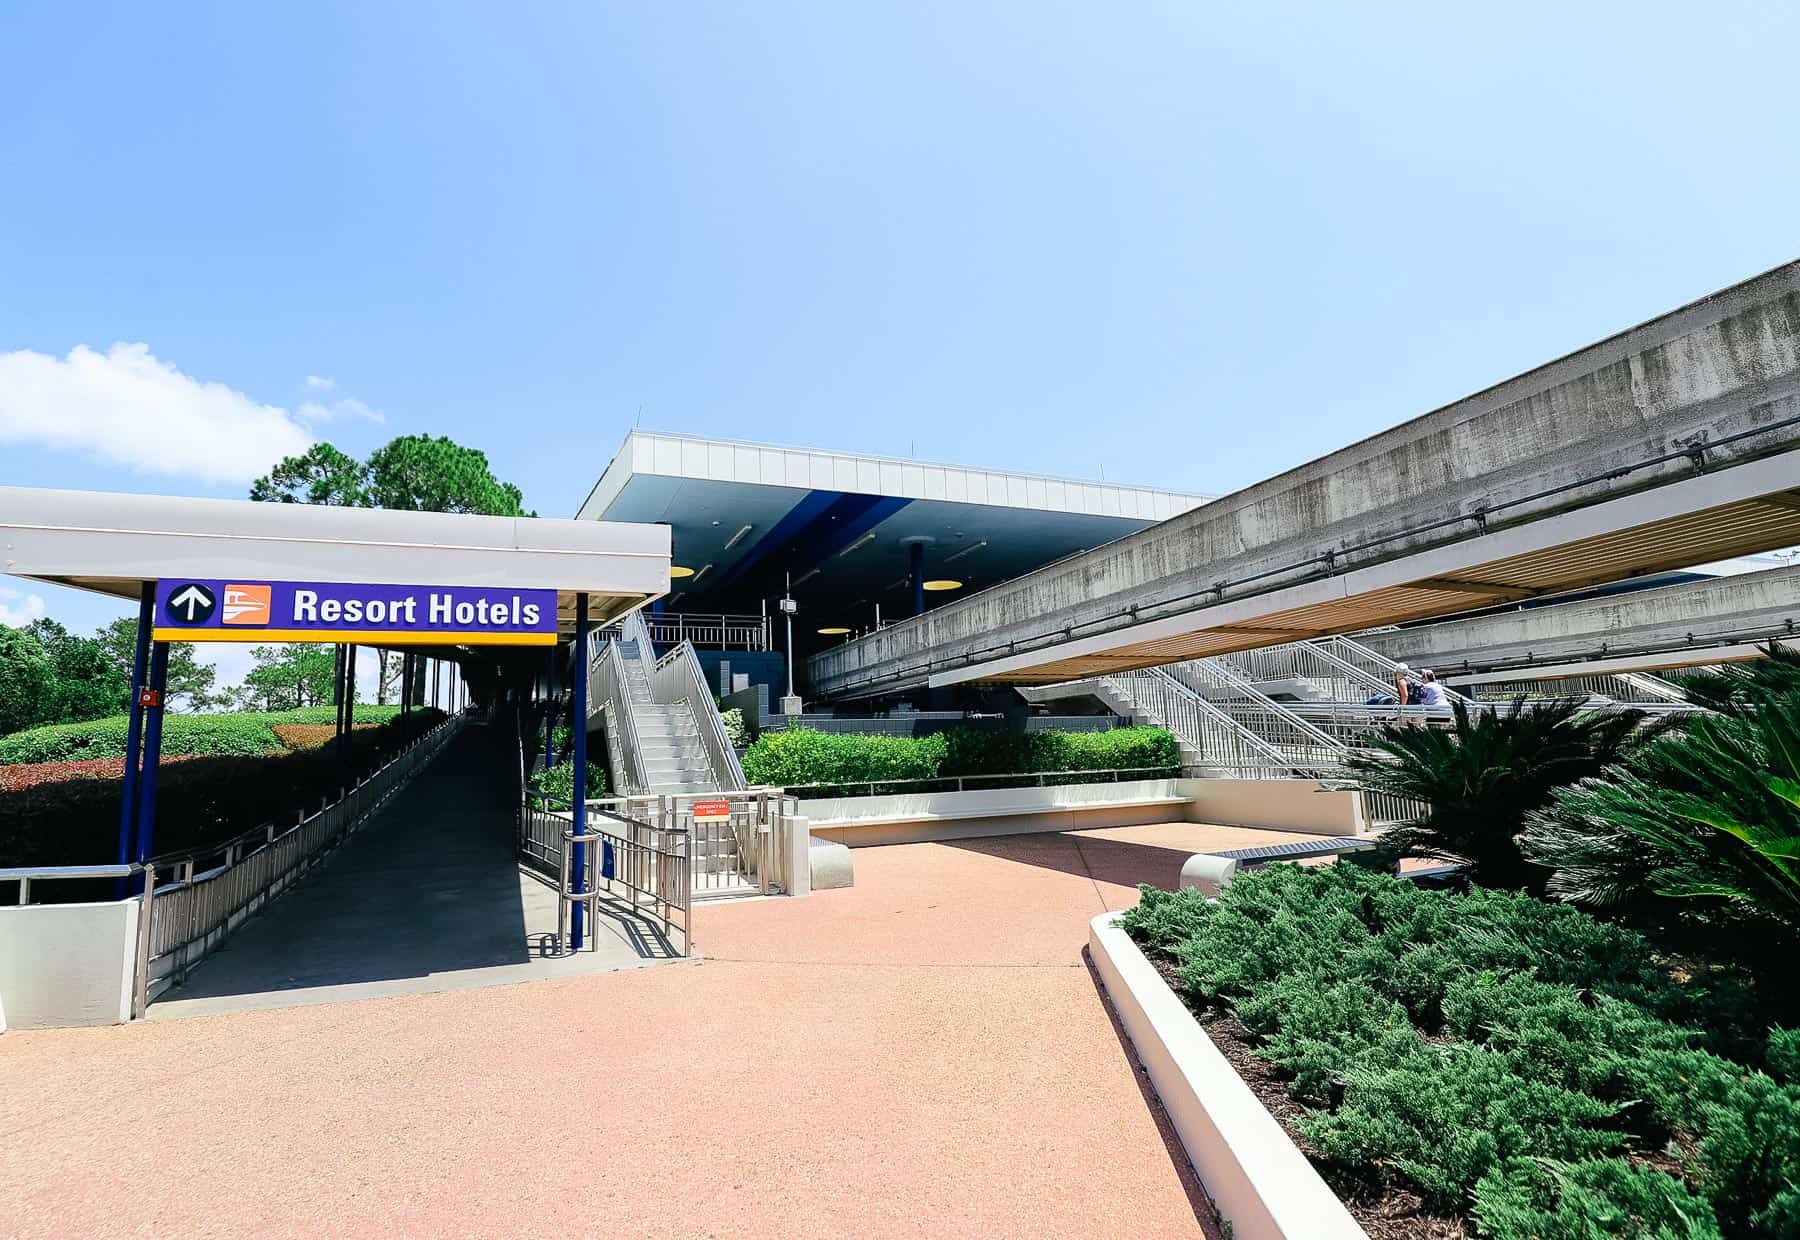 taking the monorail from Contemporary to Epcot